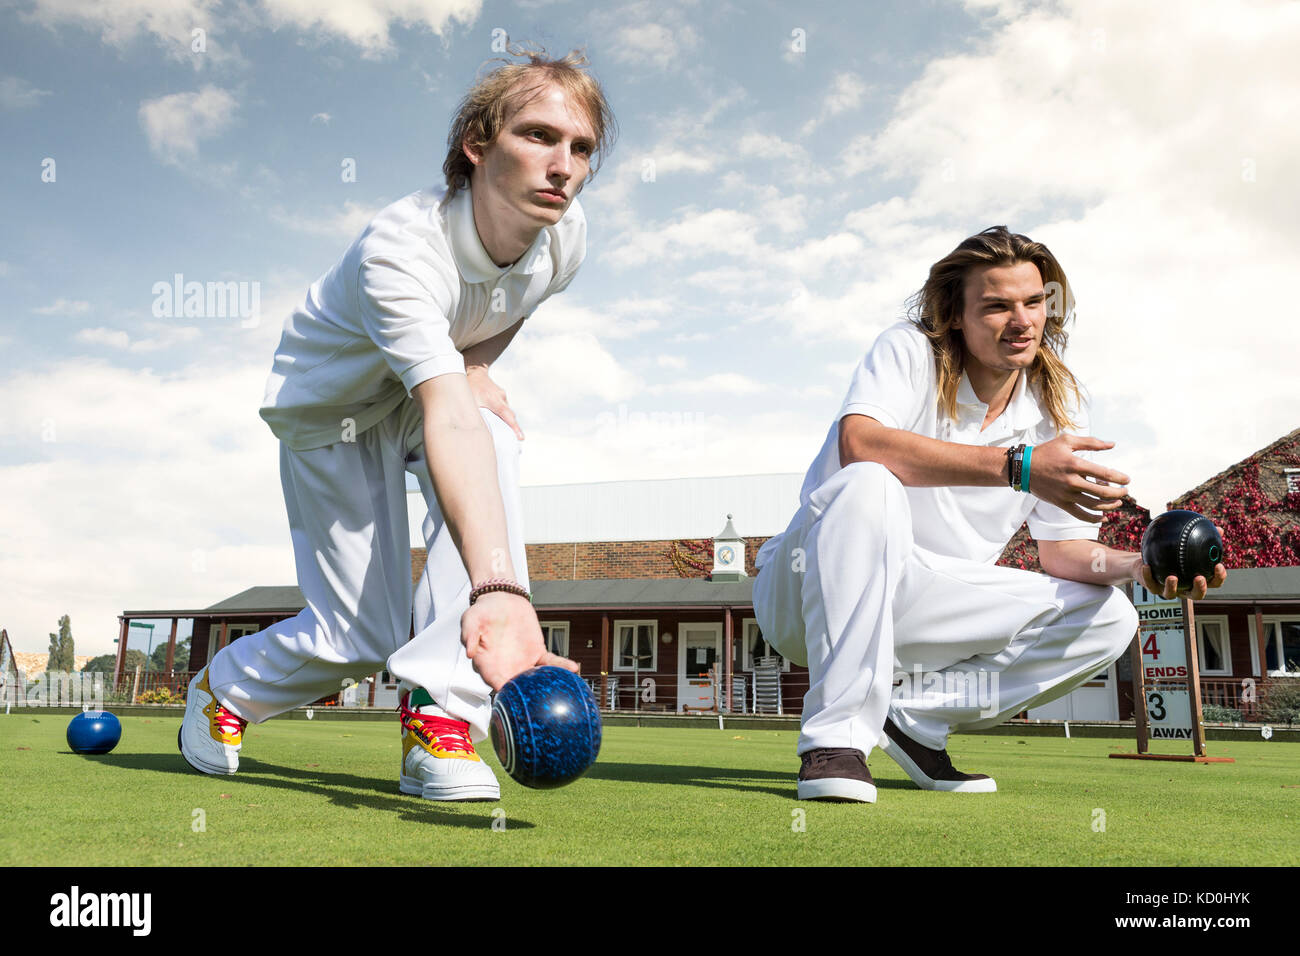 Two young men lawn bowling on bowling green Stock Photo